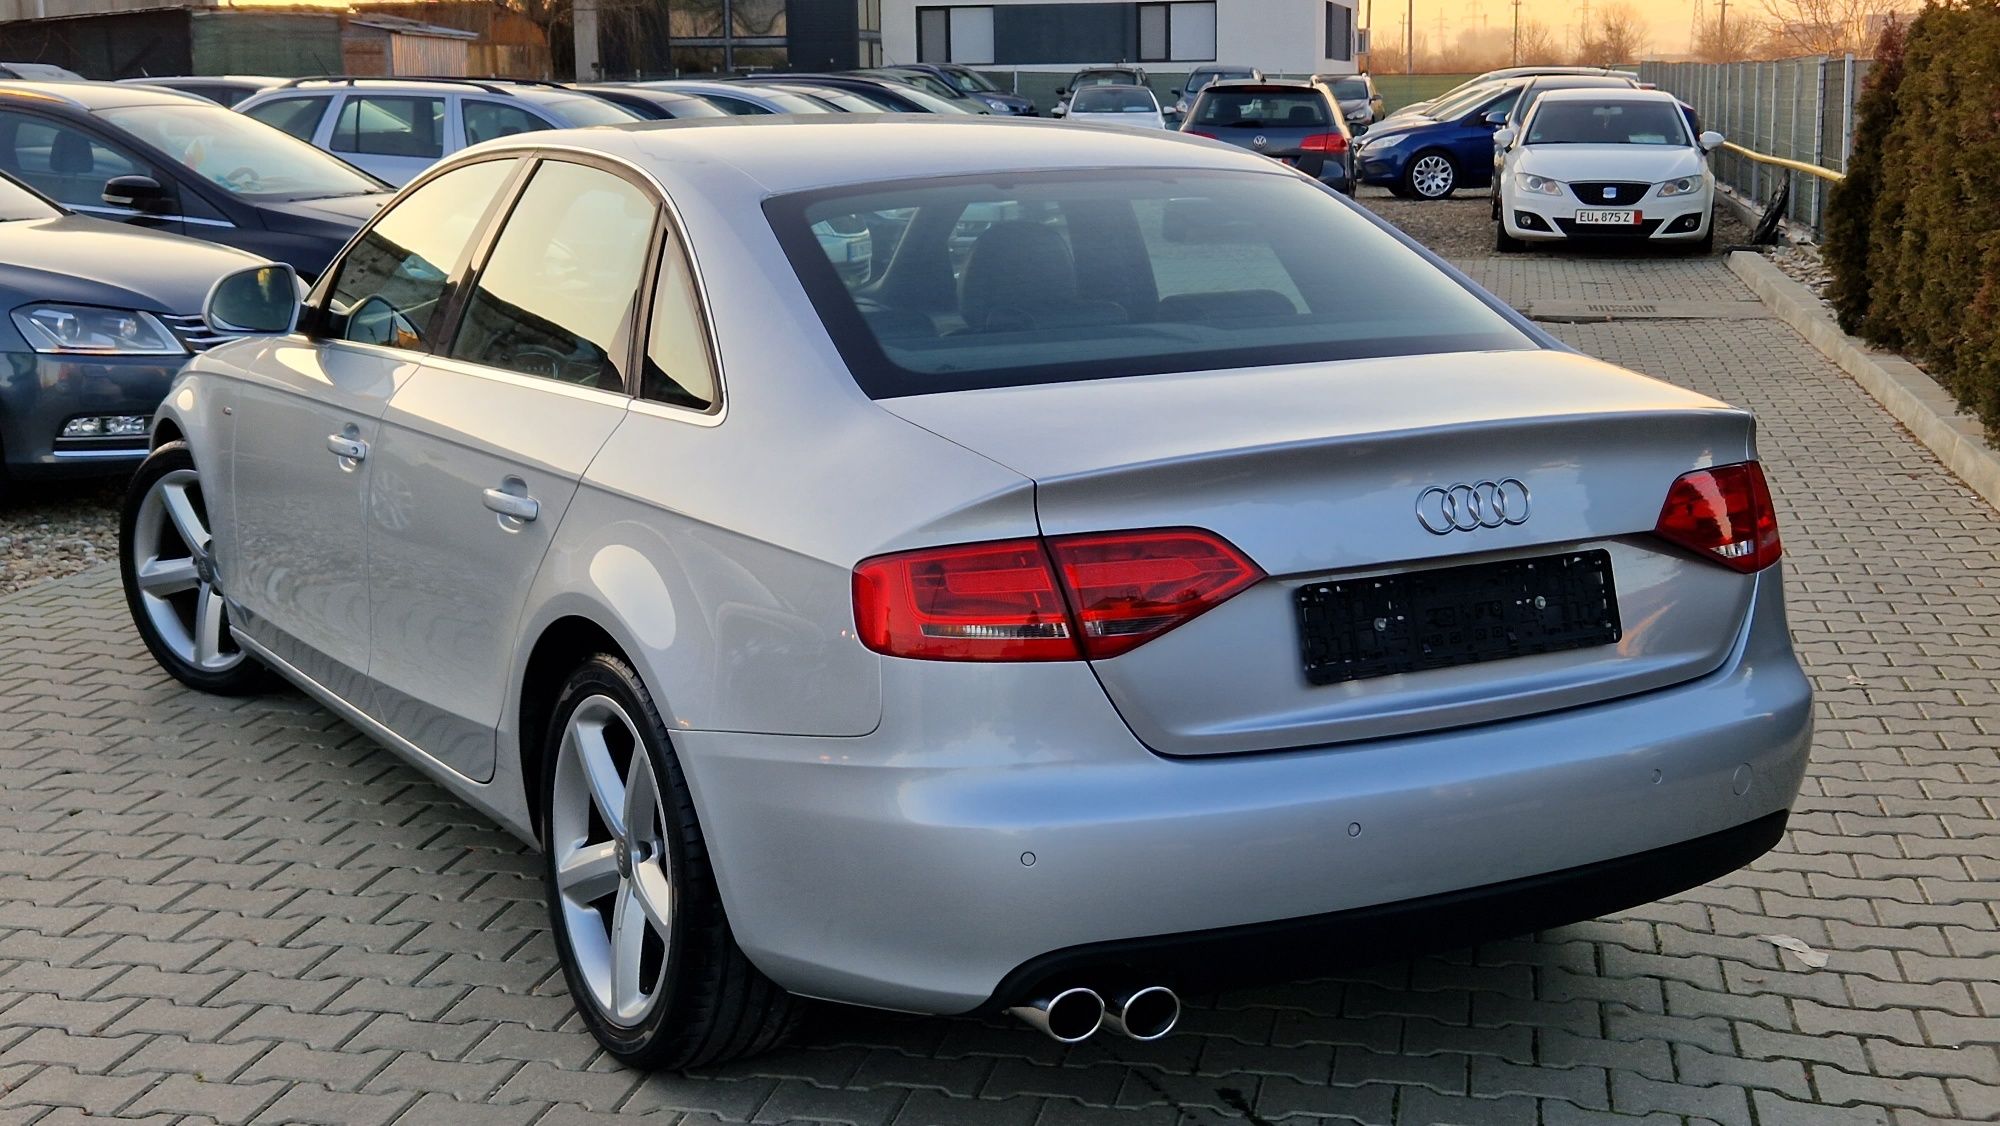 Vand Audi A4 S Line 1.8TFSI 160cp Model S Line RATE Import Germania